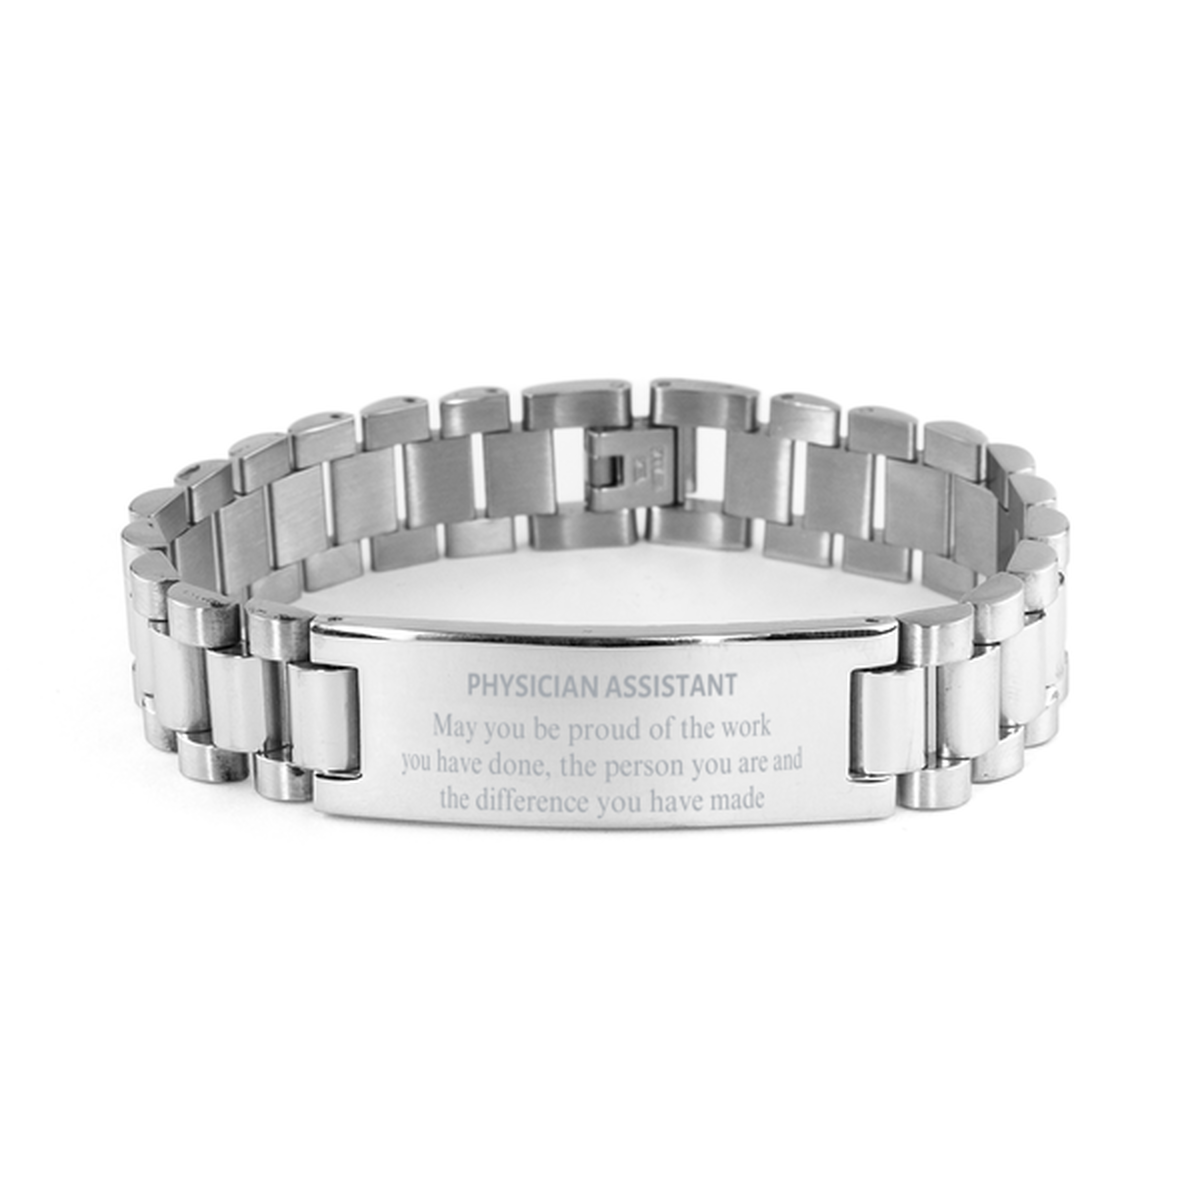 Physician Assistant May you be proud of the work you have done, Retirement Physician Assistant Ladder Stainless Steel Bracelet for Colleague Appreciation Gifts Amazing for Physician Assistant